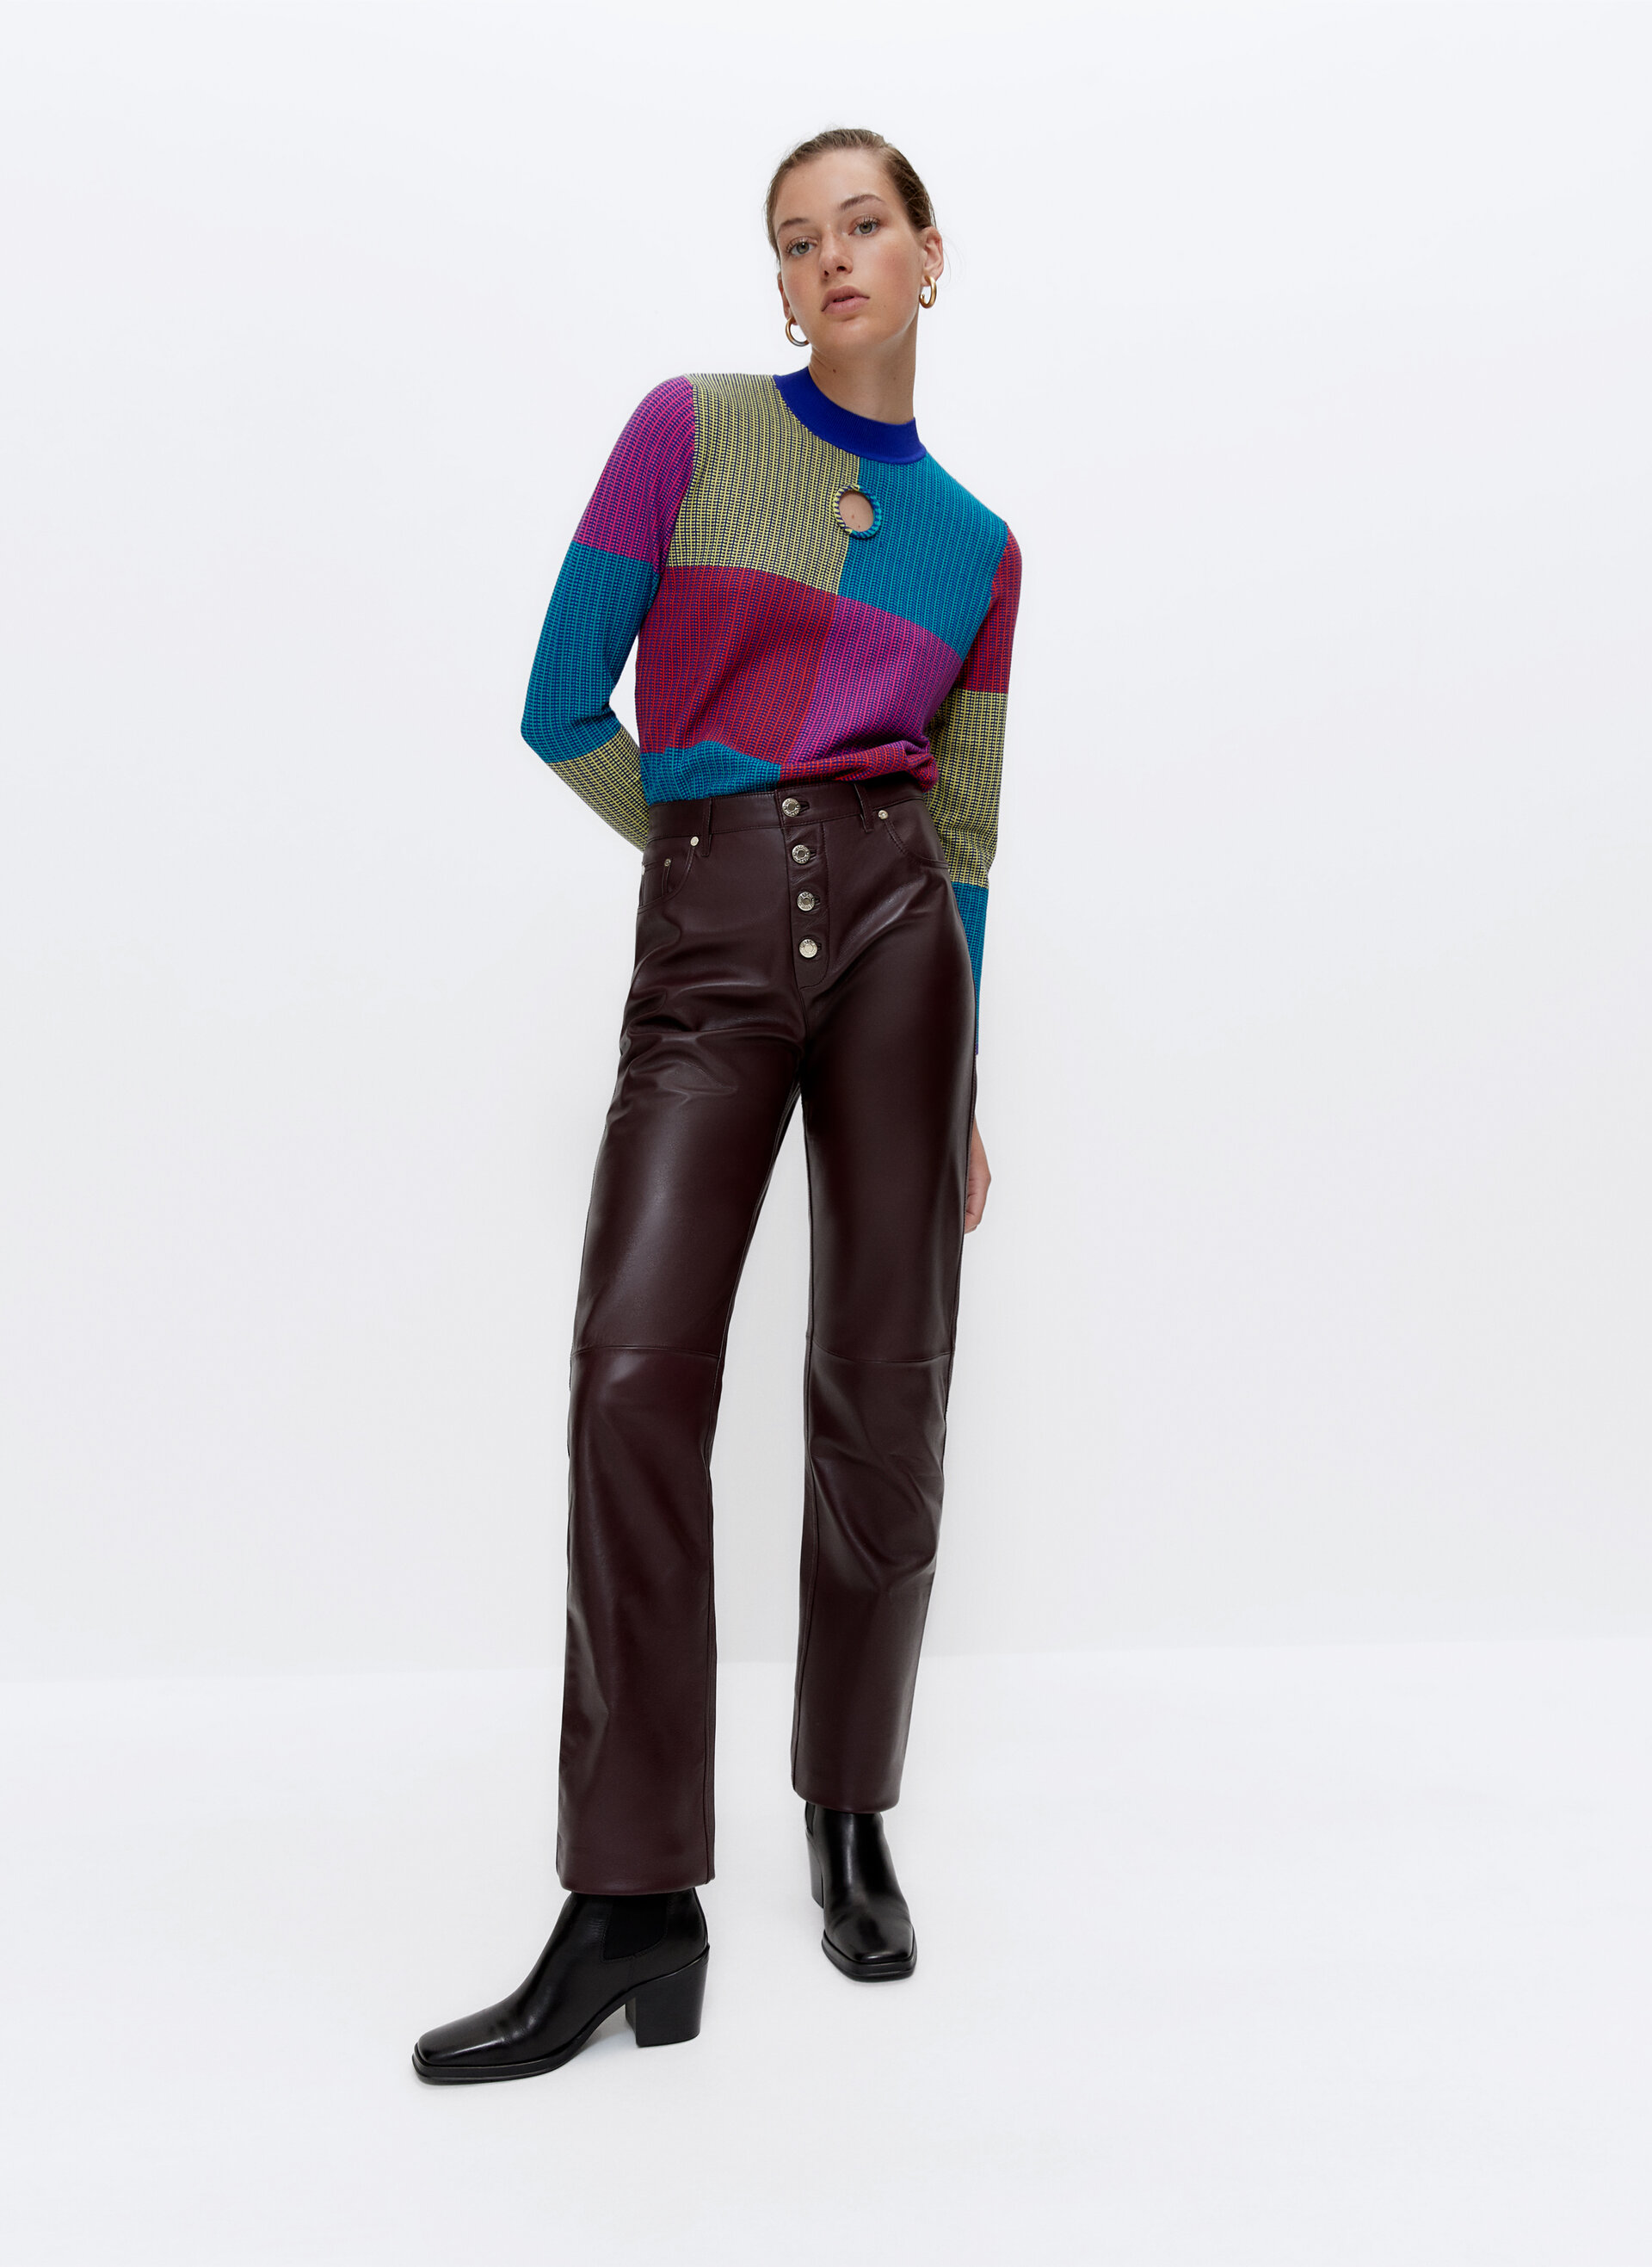 Uterque MULTICOLOURED SWEATER WITH RING DETAIL, £90.00